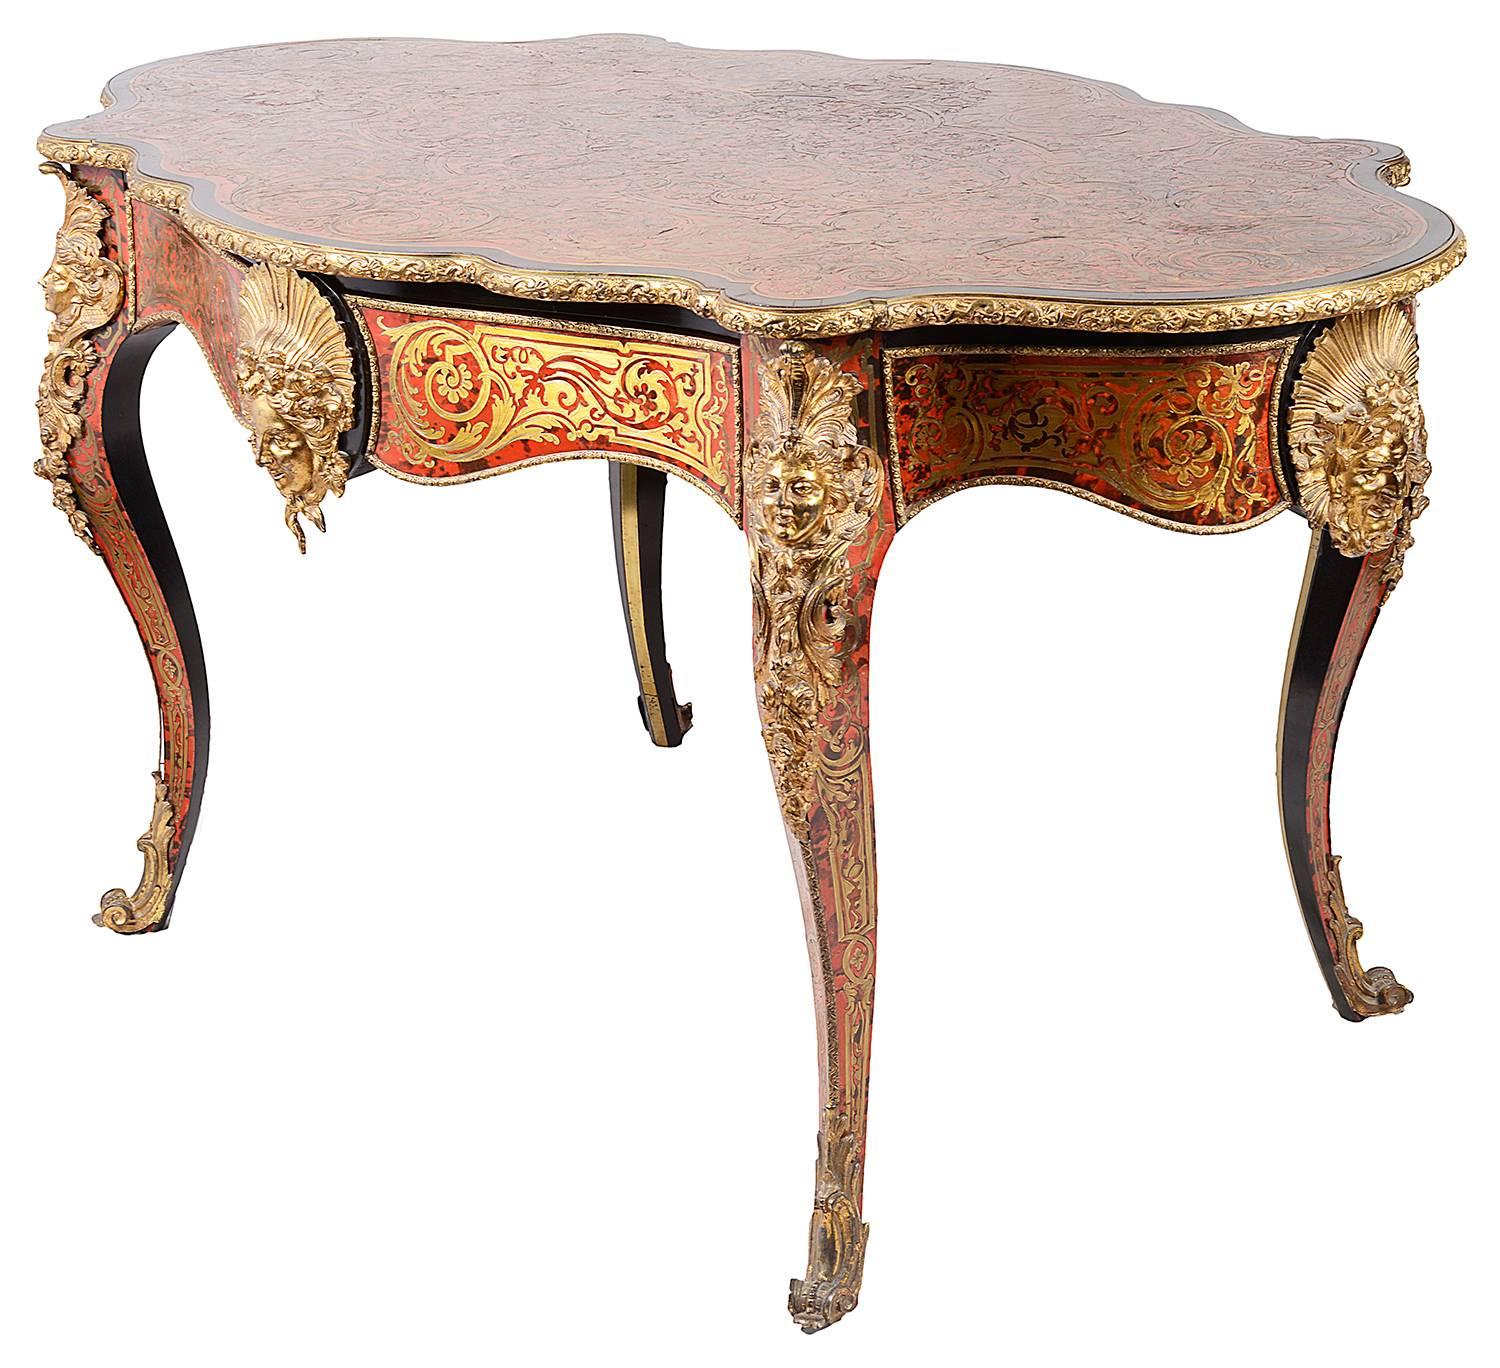 A good quality 19th century French Boulle inlaid serpentine shaped center table, having gilded ormolu mounts of sun bursts on four side, a mahogany lined frieze drawer and raised on elegant cabriole legs each with ormolu mounts, terminating in